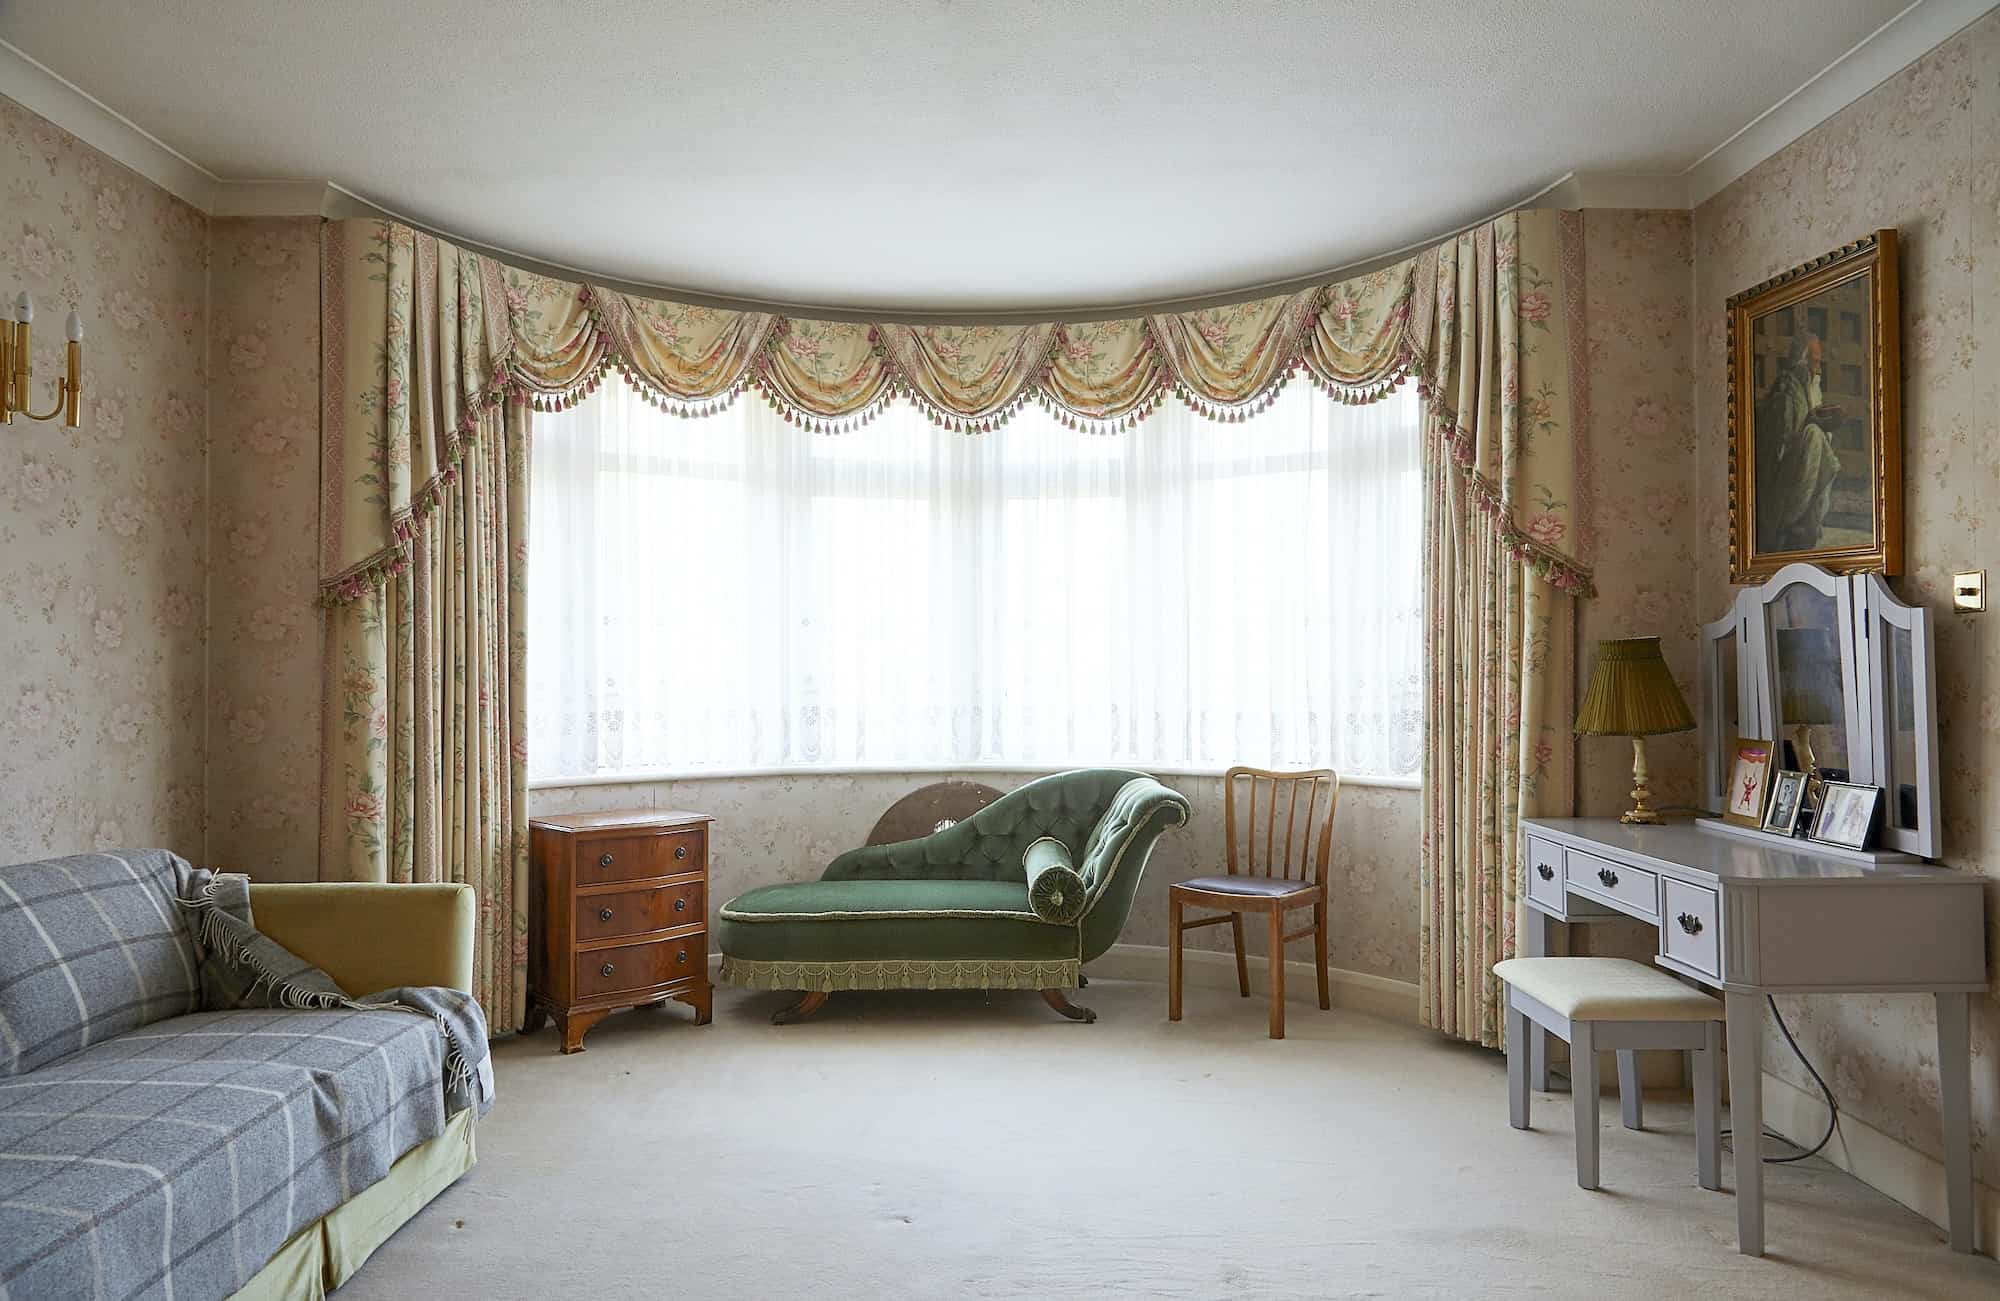 Lillian N3 - Blog post - Unusual Locations - 1930s bedroom with drapes and bay window - The Location Guys